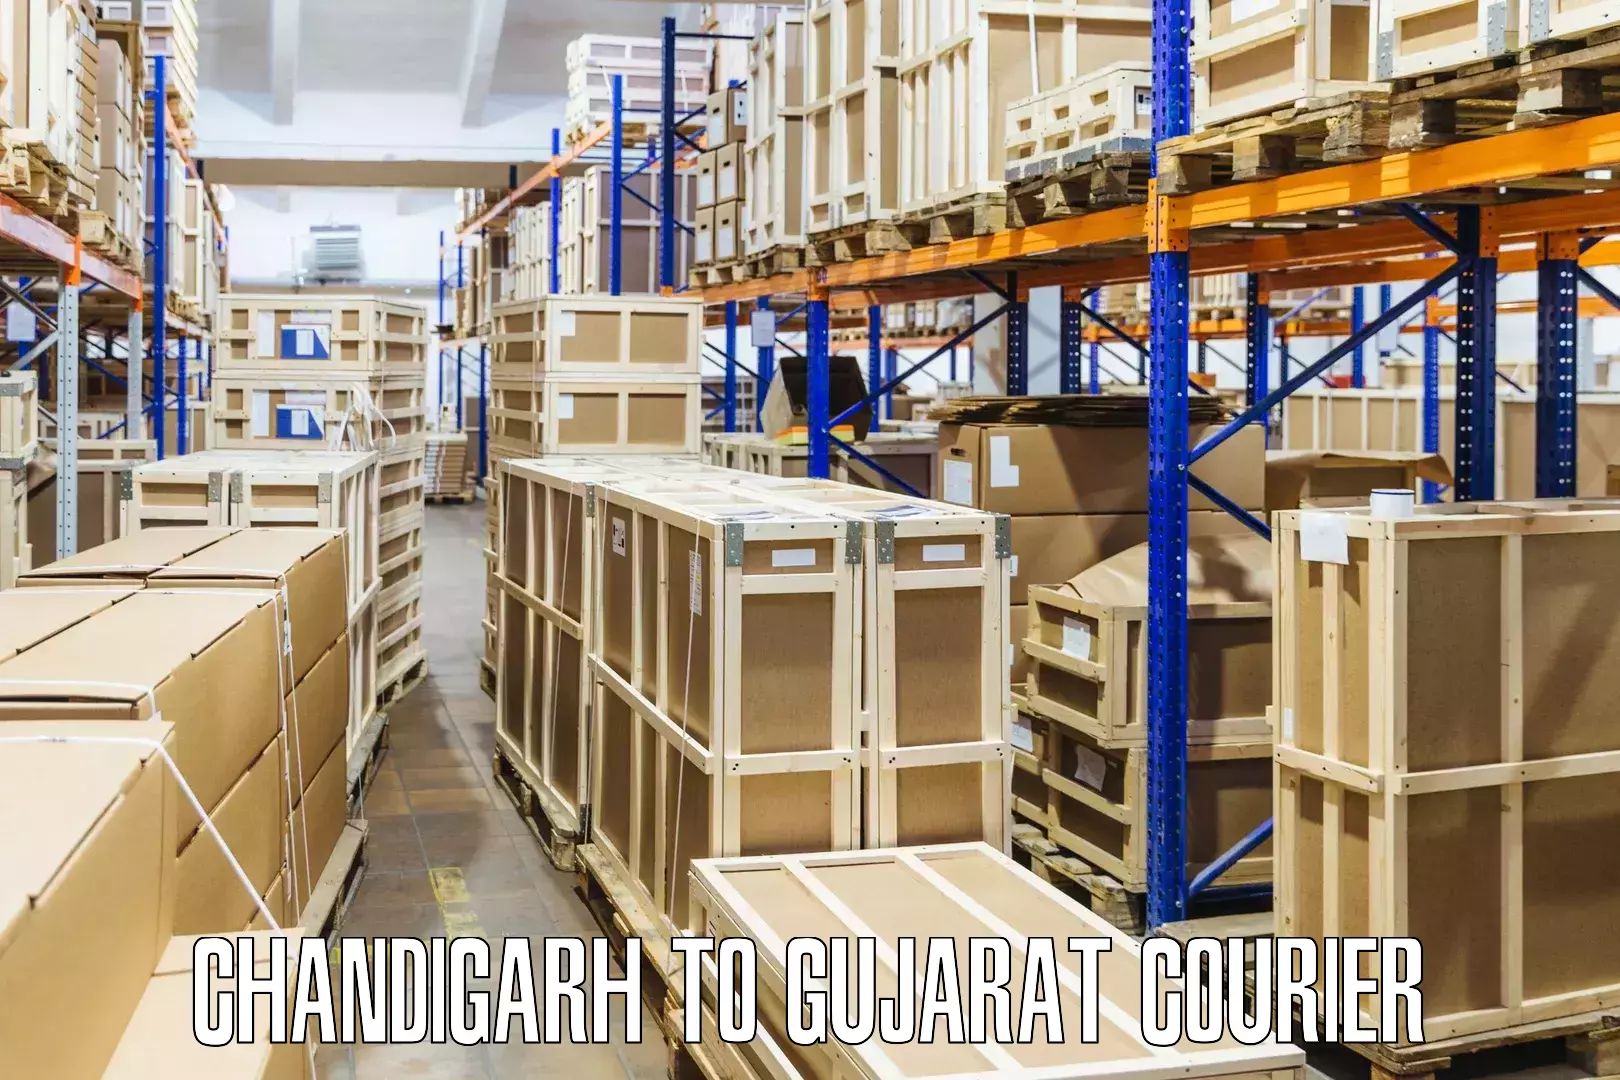 Holiday shipping services Chandigarh to GIDC